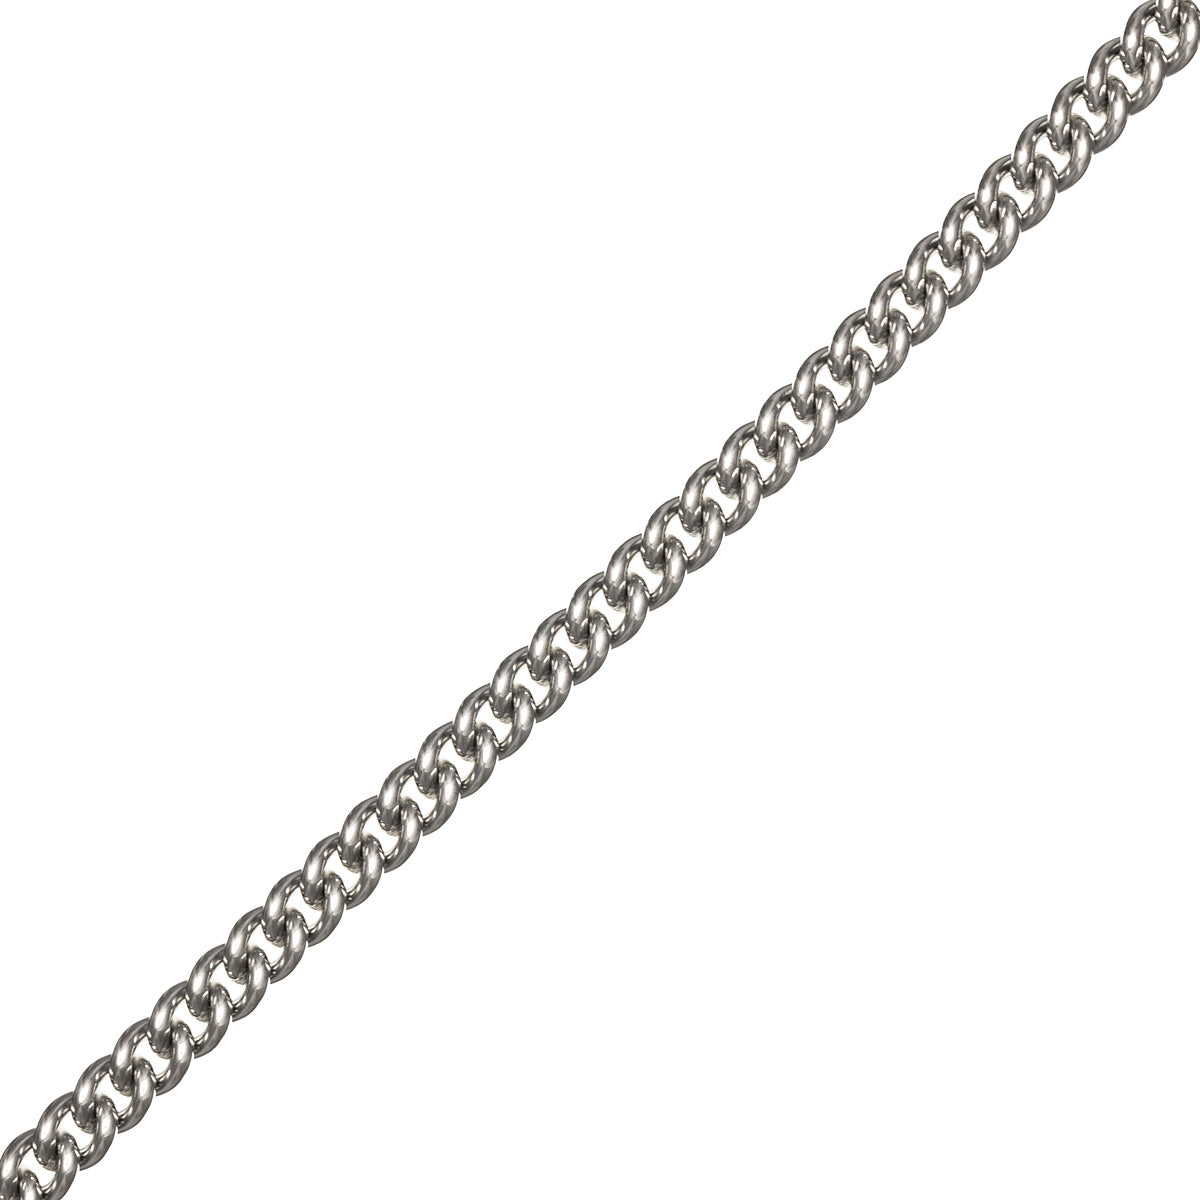 Rounded armoured steel chain chain 60cm 1cm (Steel 316L)